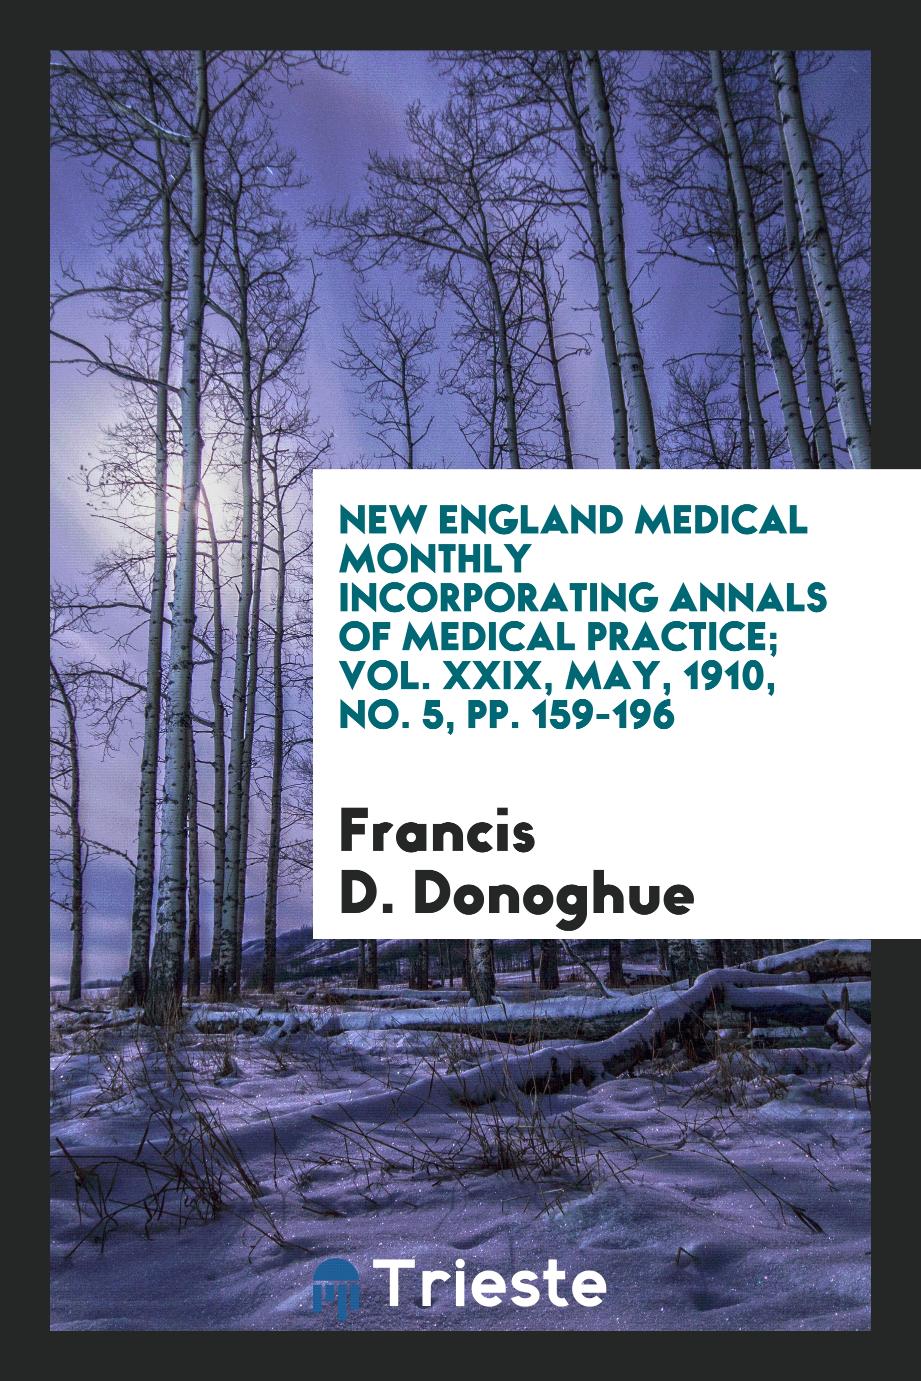 New England Medical Monthly incorporating annals of medical practice; Vol. XXIX, May, 1910, No. 5, pp. 159-196